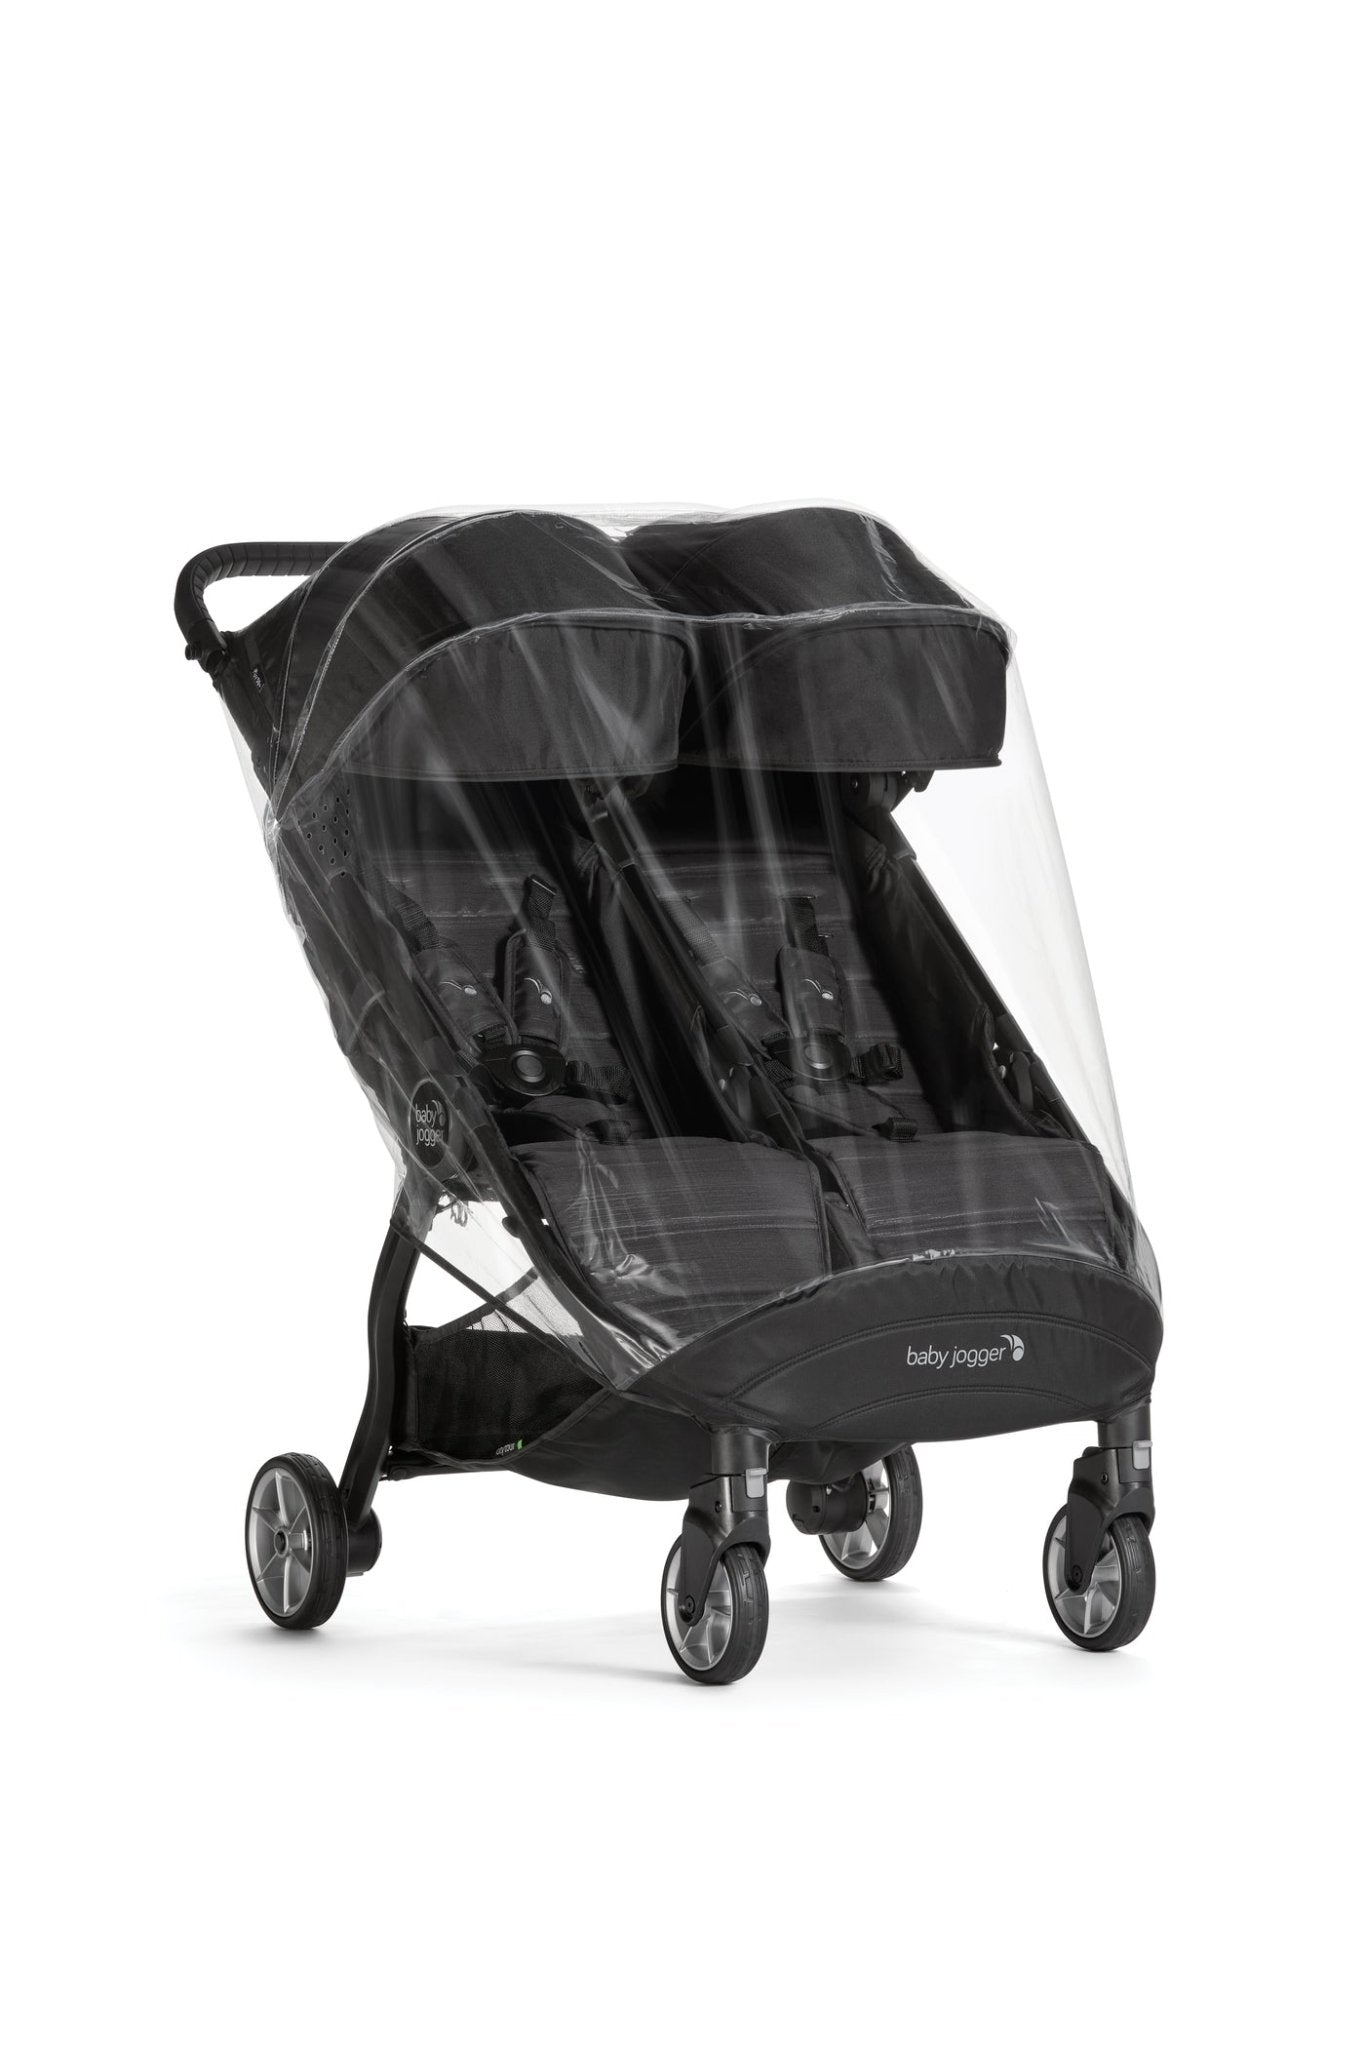 Baby Jogger City Tour 2 Double, Weather Shield - ANB Baby -$50 - $75